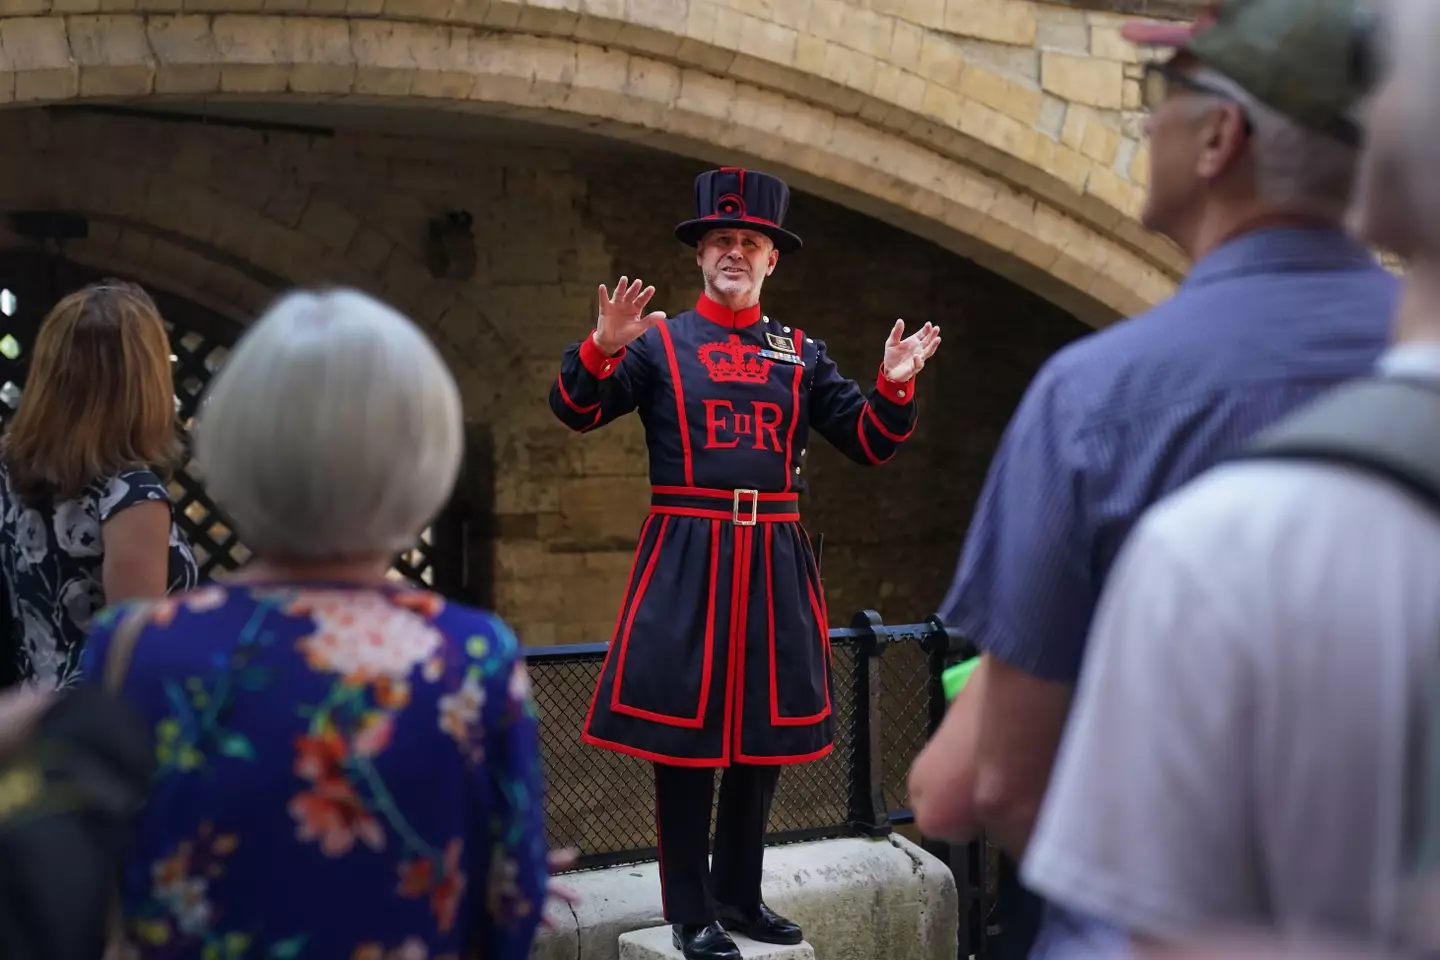 Yeoman Warders hold the famous tours of the Tower of London.